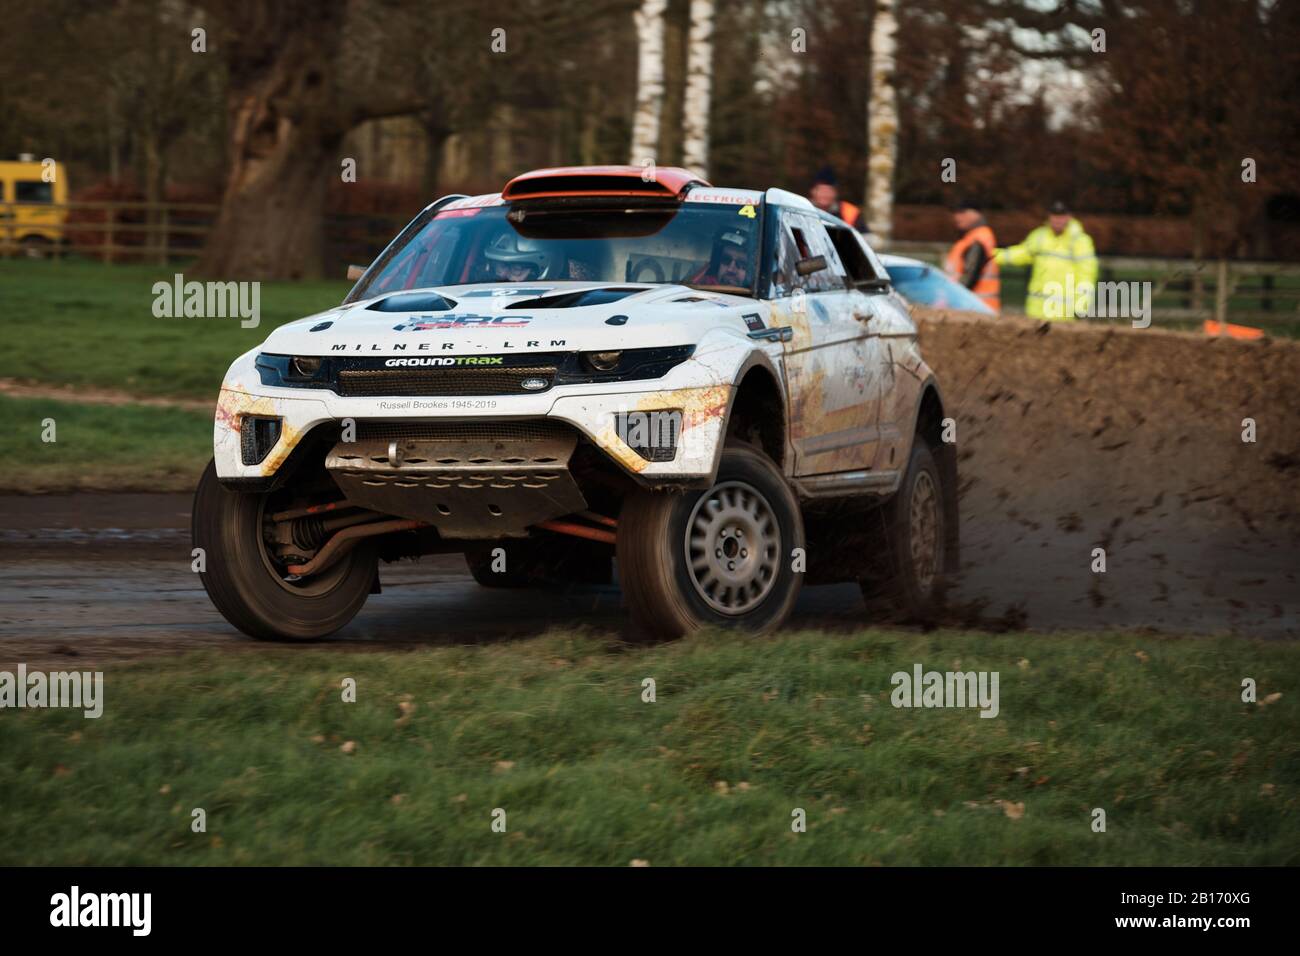 Stoneleigh Park, Warwickshire, UK. 23rd February 2020. Milner LRM rally car during the 2020 Race Retro at Stoneleigh Park Circuit. Photo by Gergo Toth / Alamy Live News Stock Photo